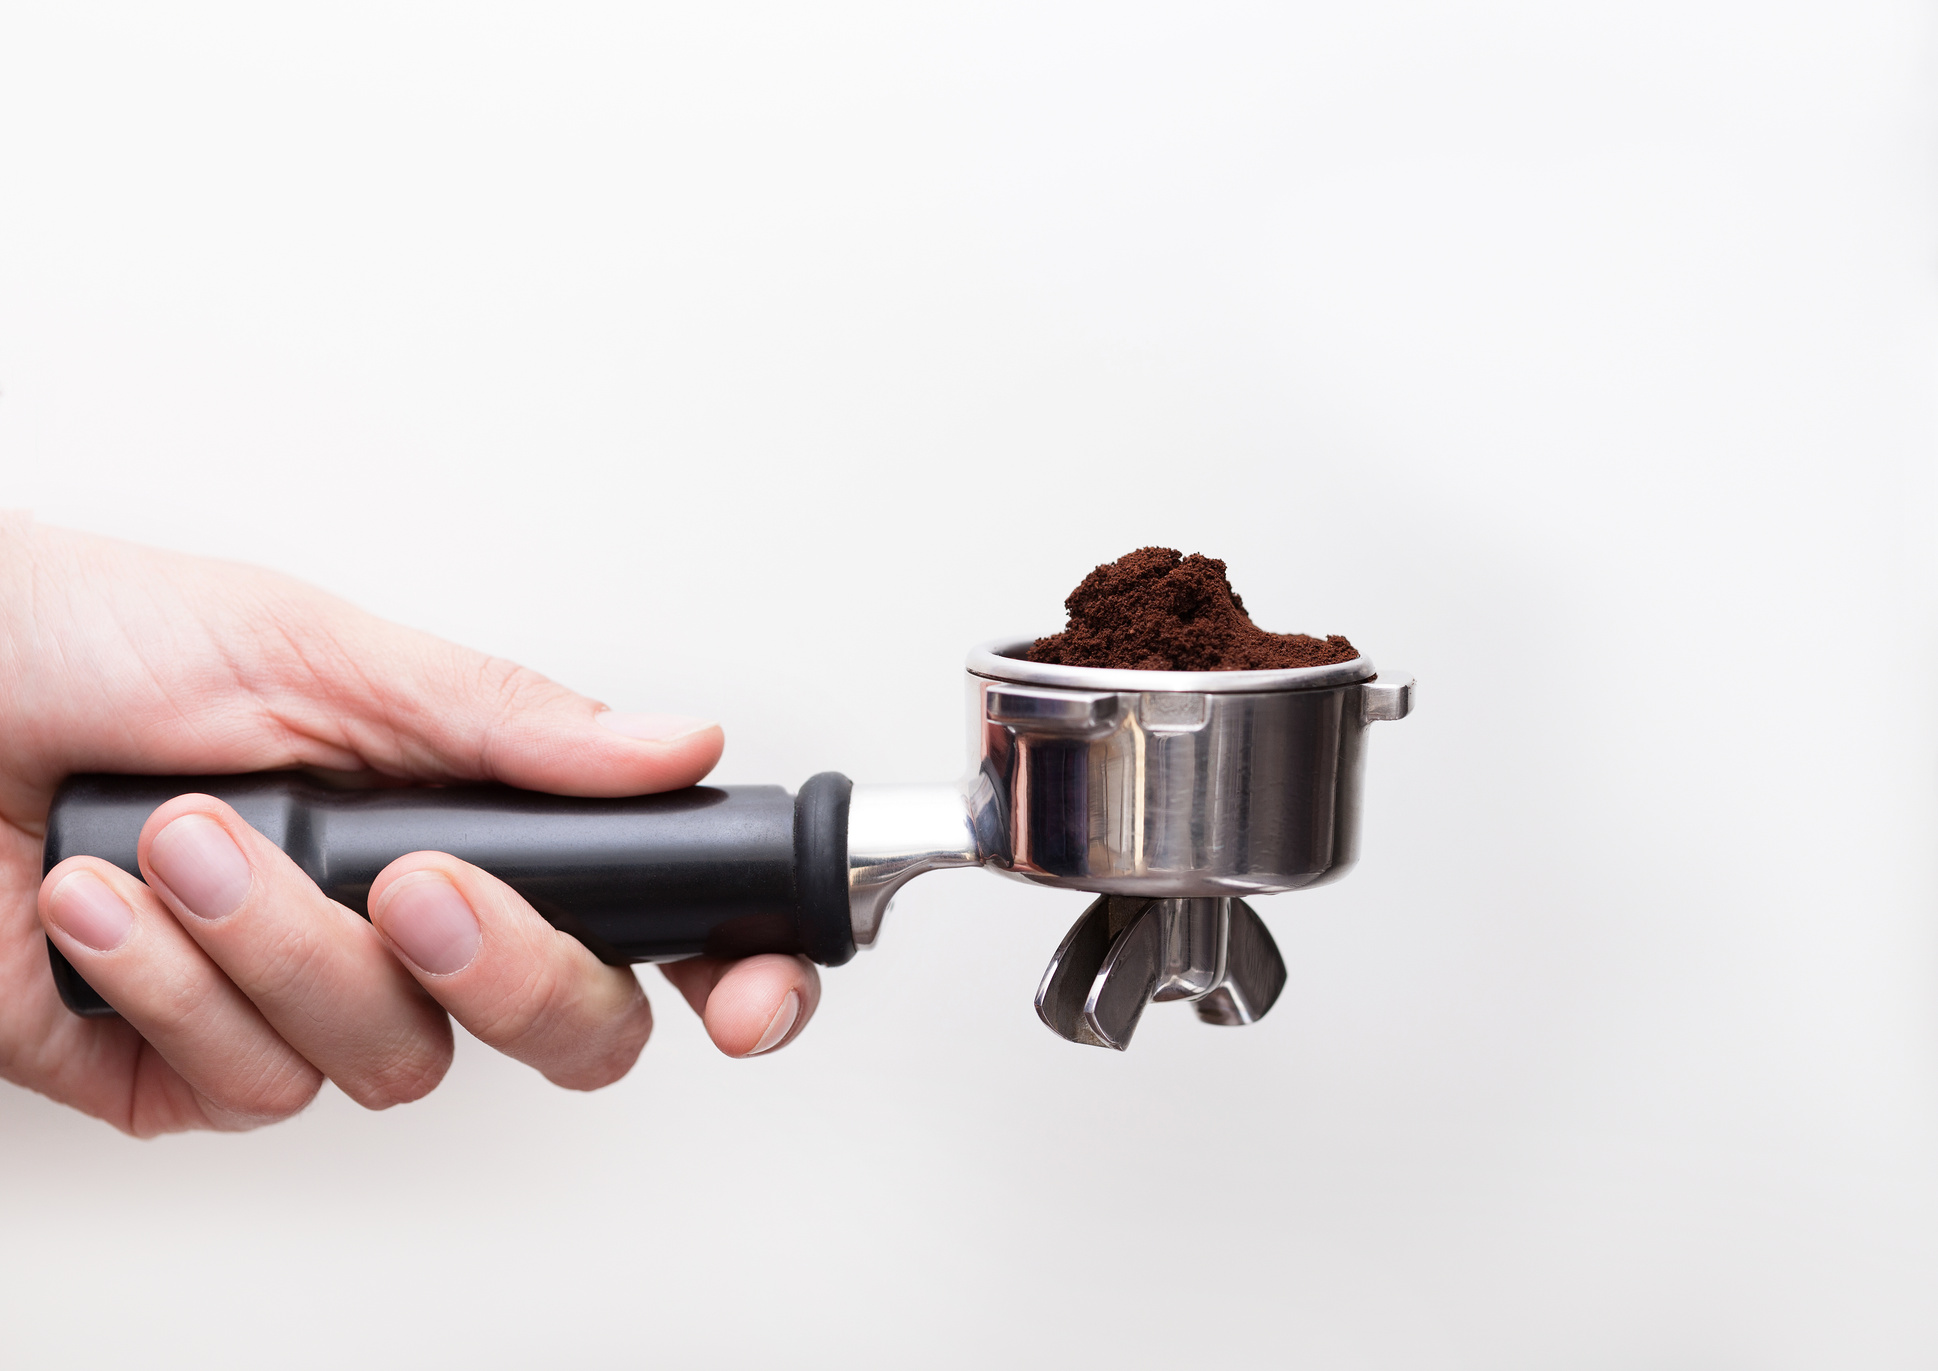 Man is using a tamper to press freshly ground coffee